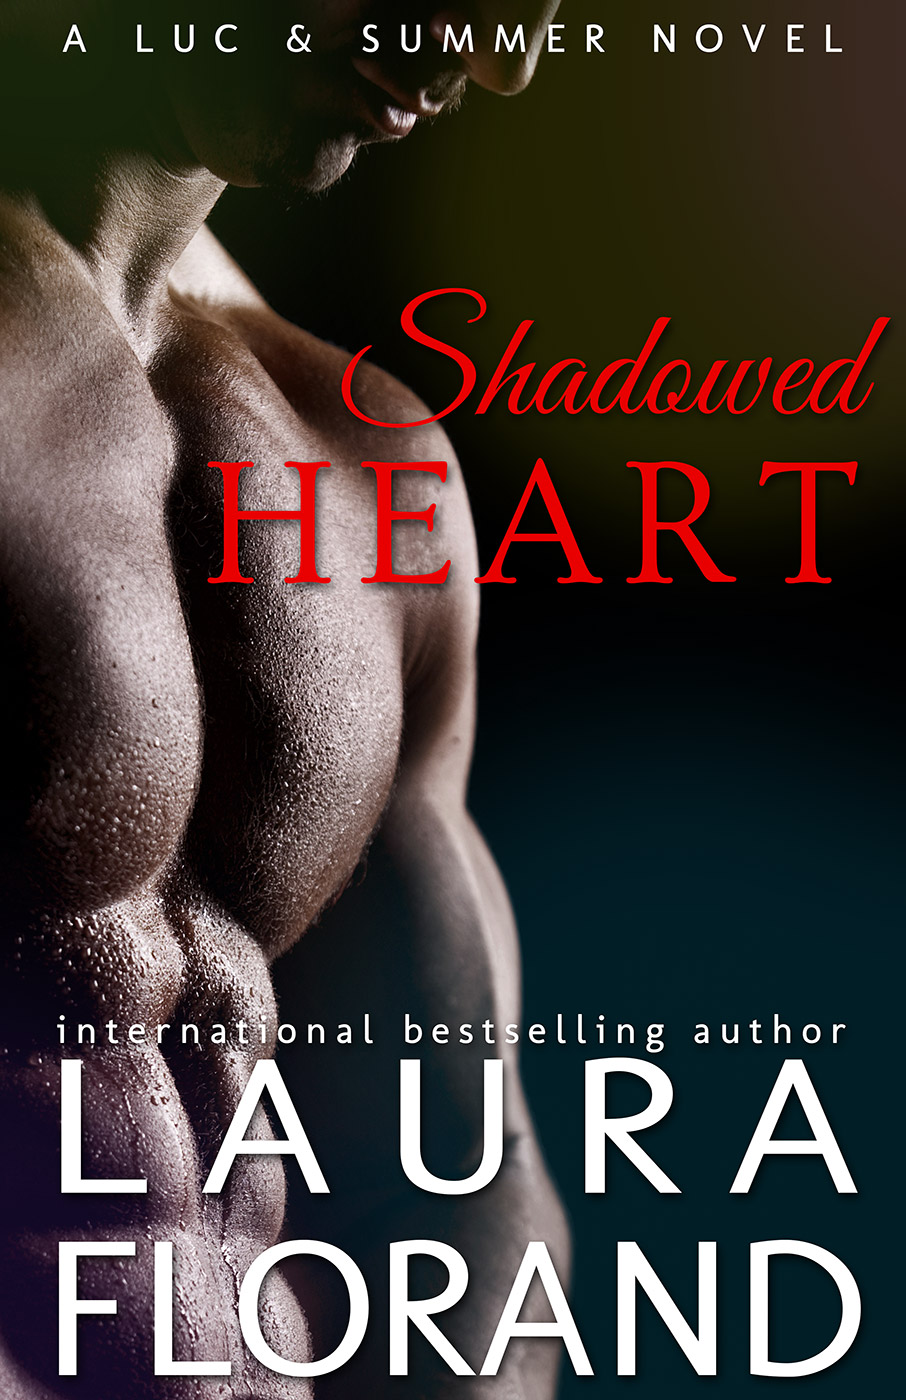 Shadowed Heart (2014) by Laura Florand